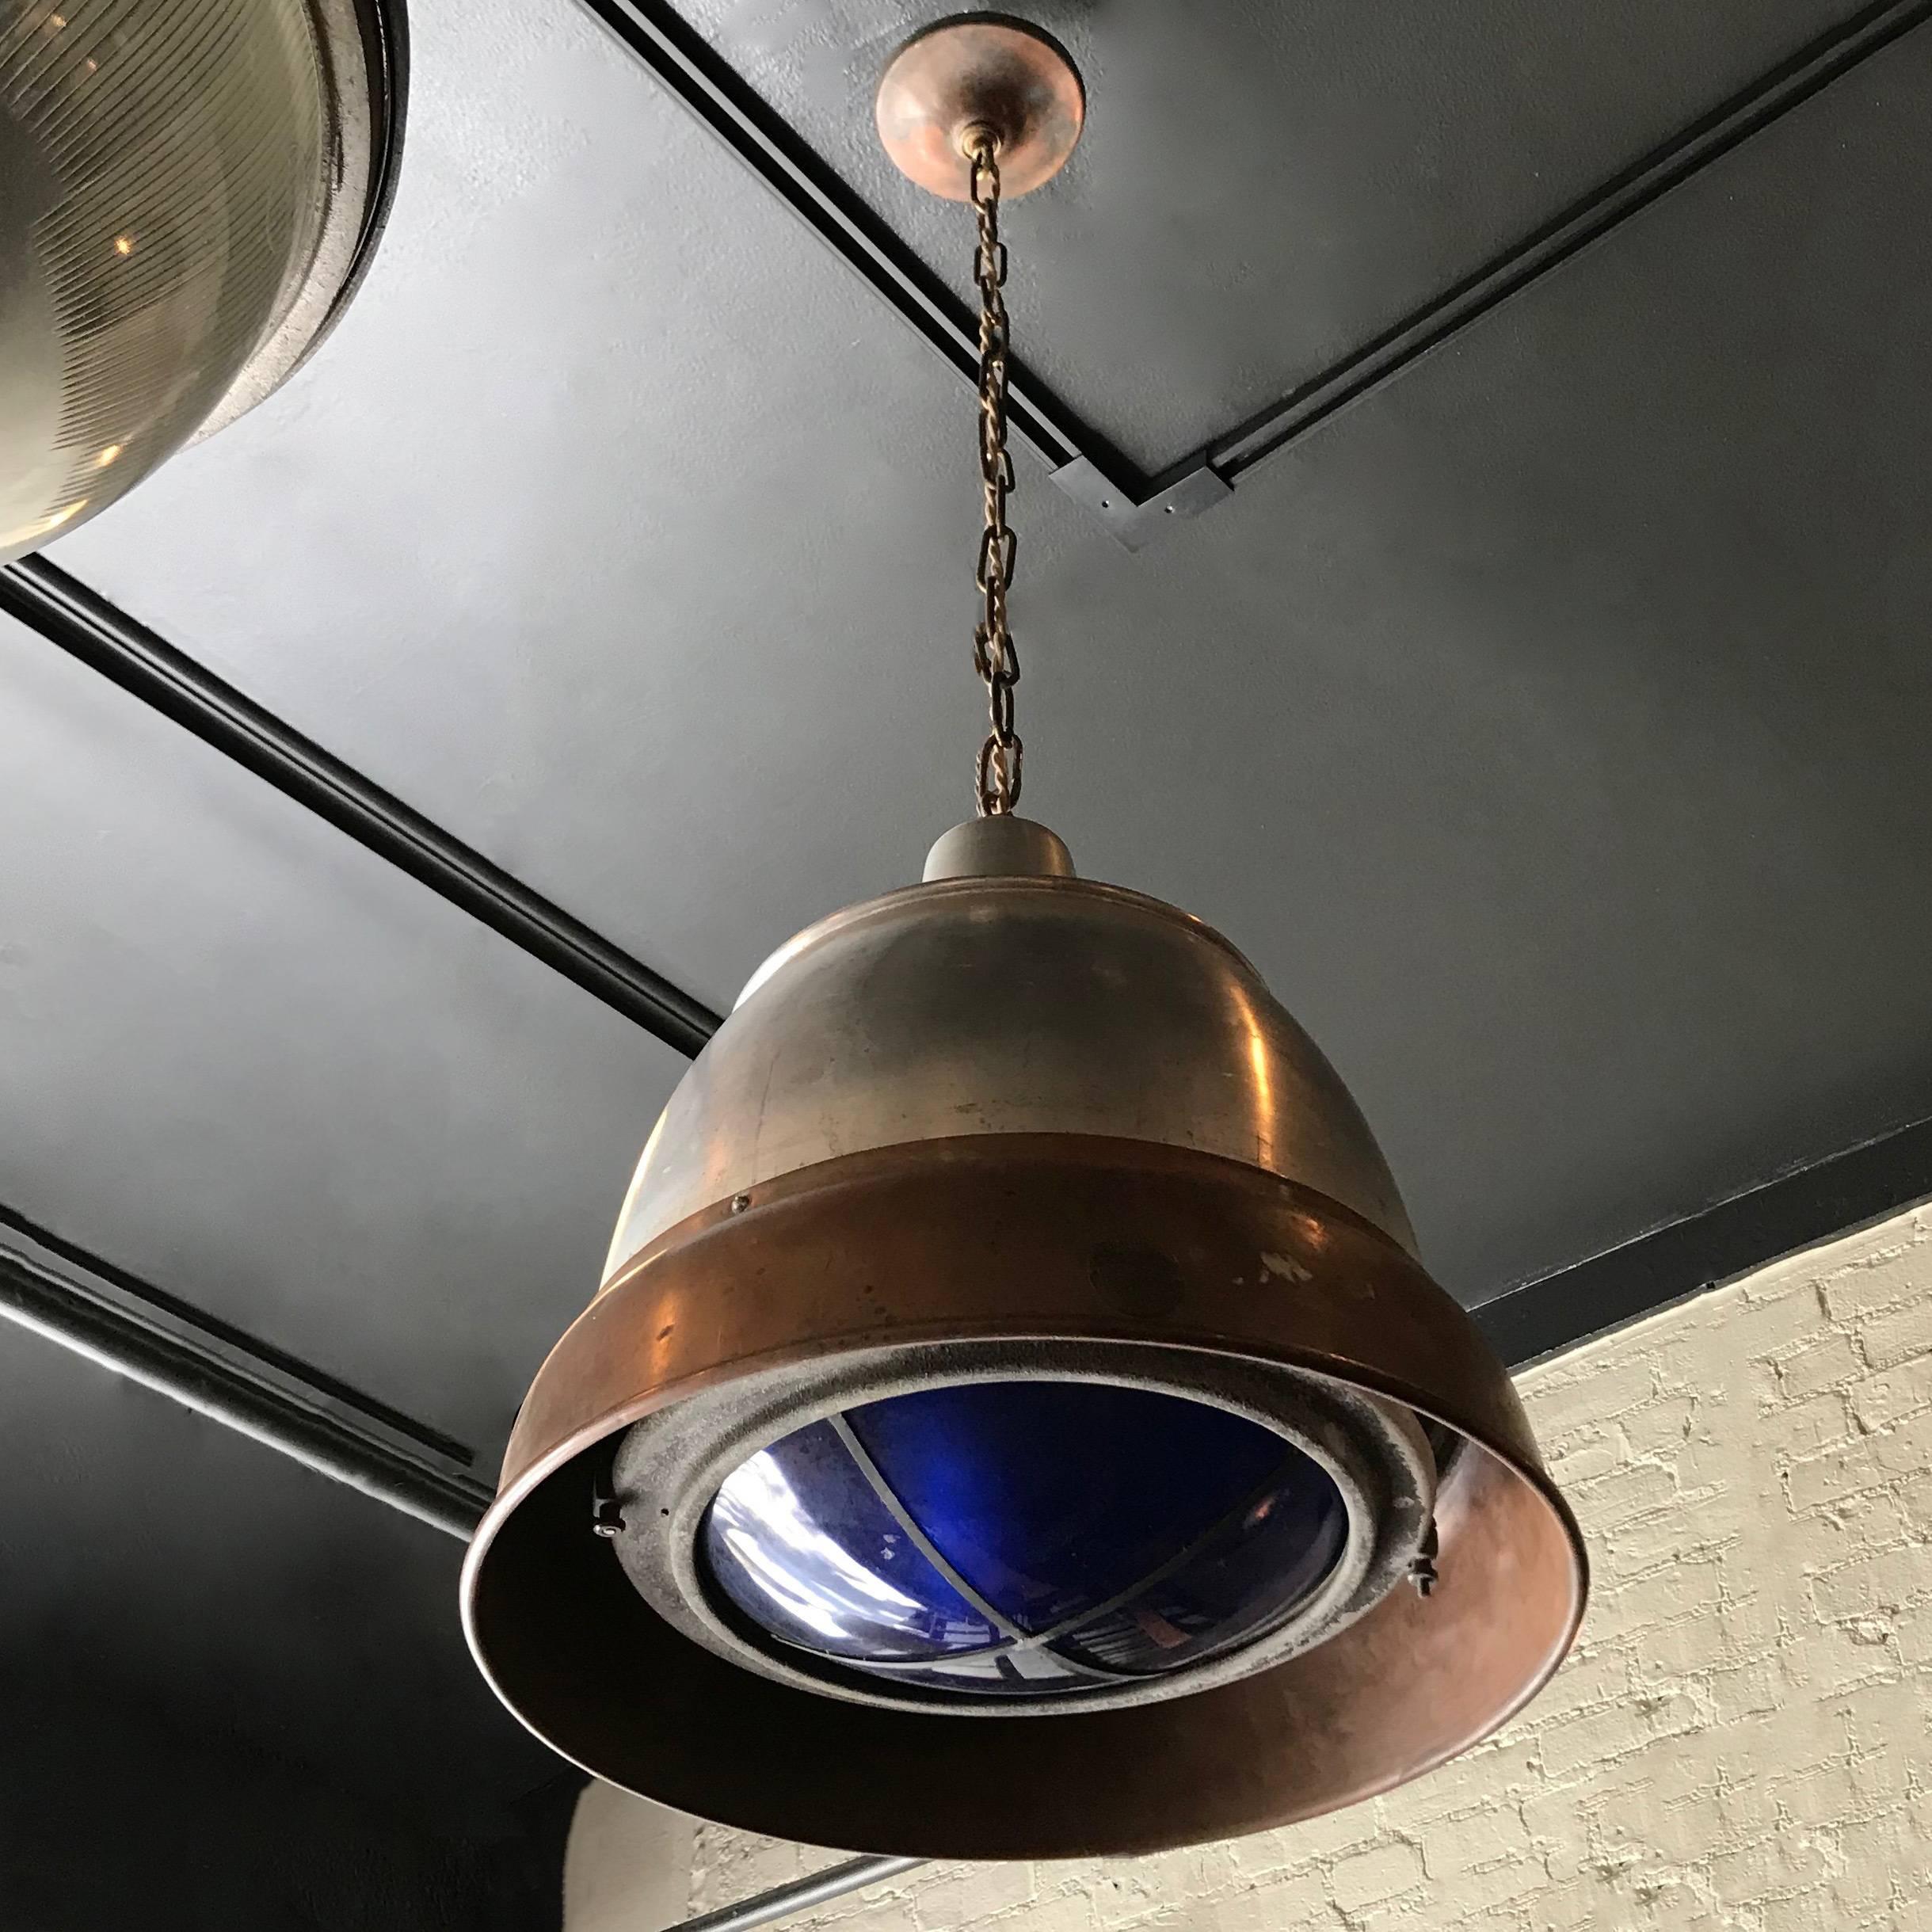 Large, industrial pendant light by Macbeth features a copper and aluminium dome shade with blue glass filter shade for daylight color correction, hangs on a chain with matching canopy. Overall height is 45 inches.